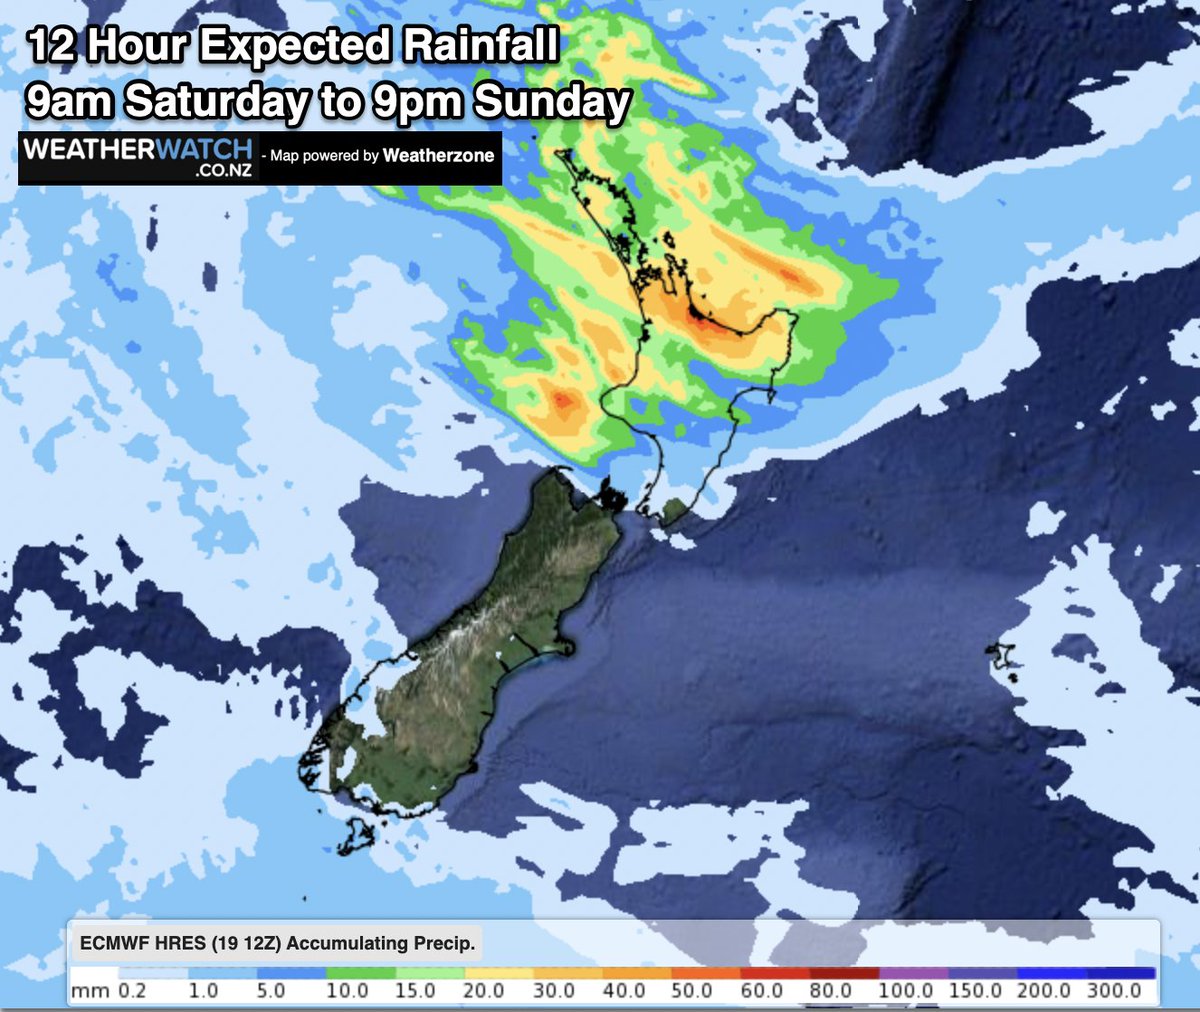 ☔️Expected Rainfall to 9pm Saturday... some localised downpours within this rain band could push totals higher - hence the northern rain watches in force by MetService. A 'watch' is not a warning... but it's a heads up that a 'warning' might possibly be issued soon/later.